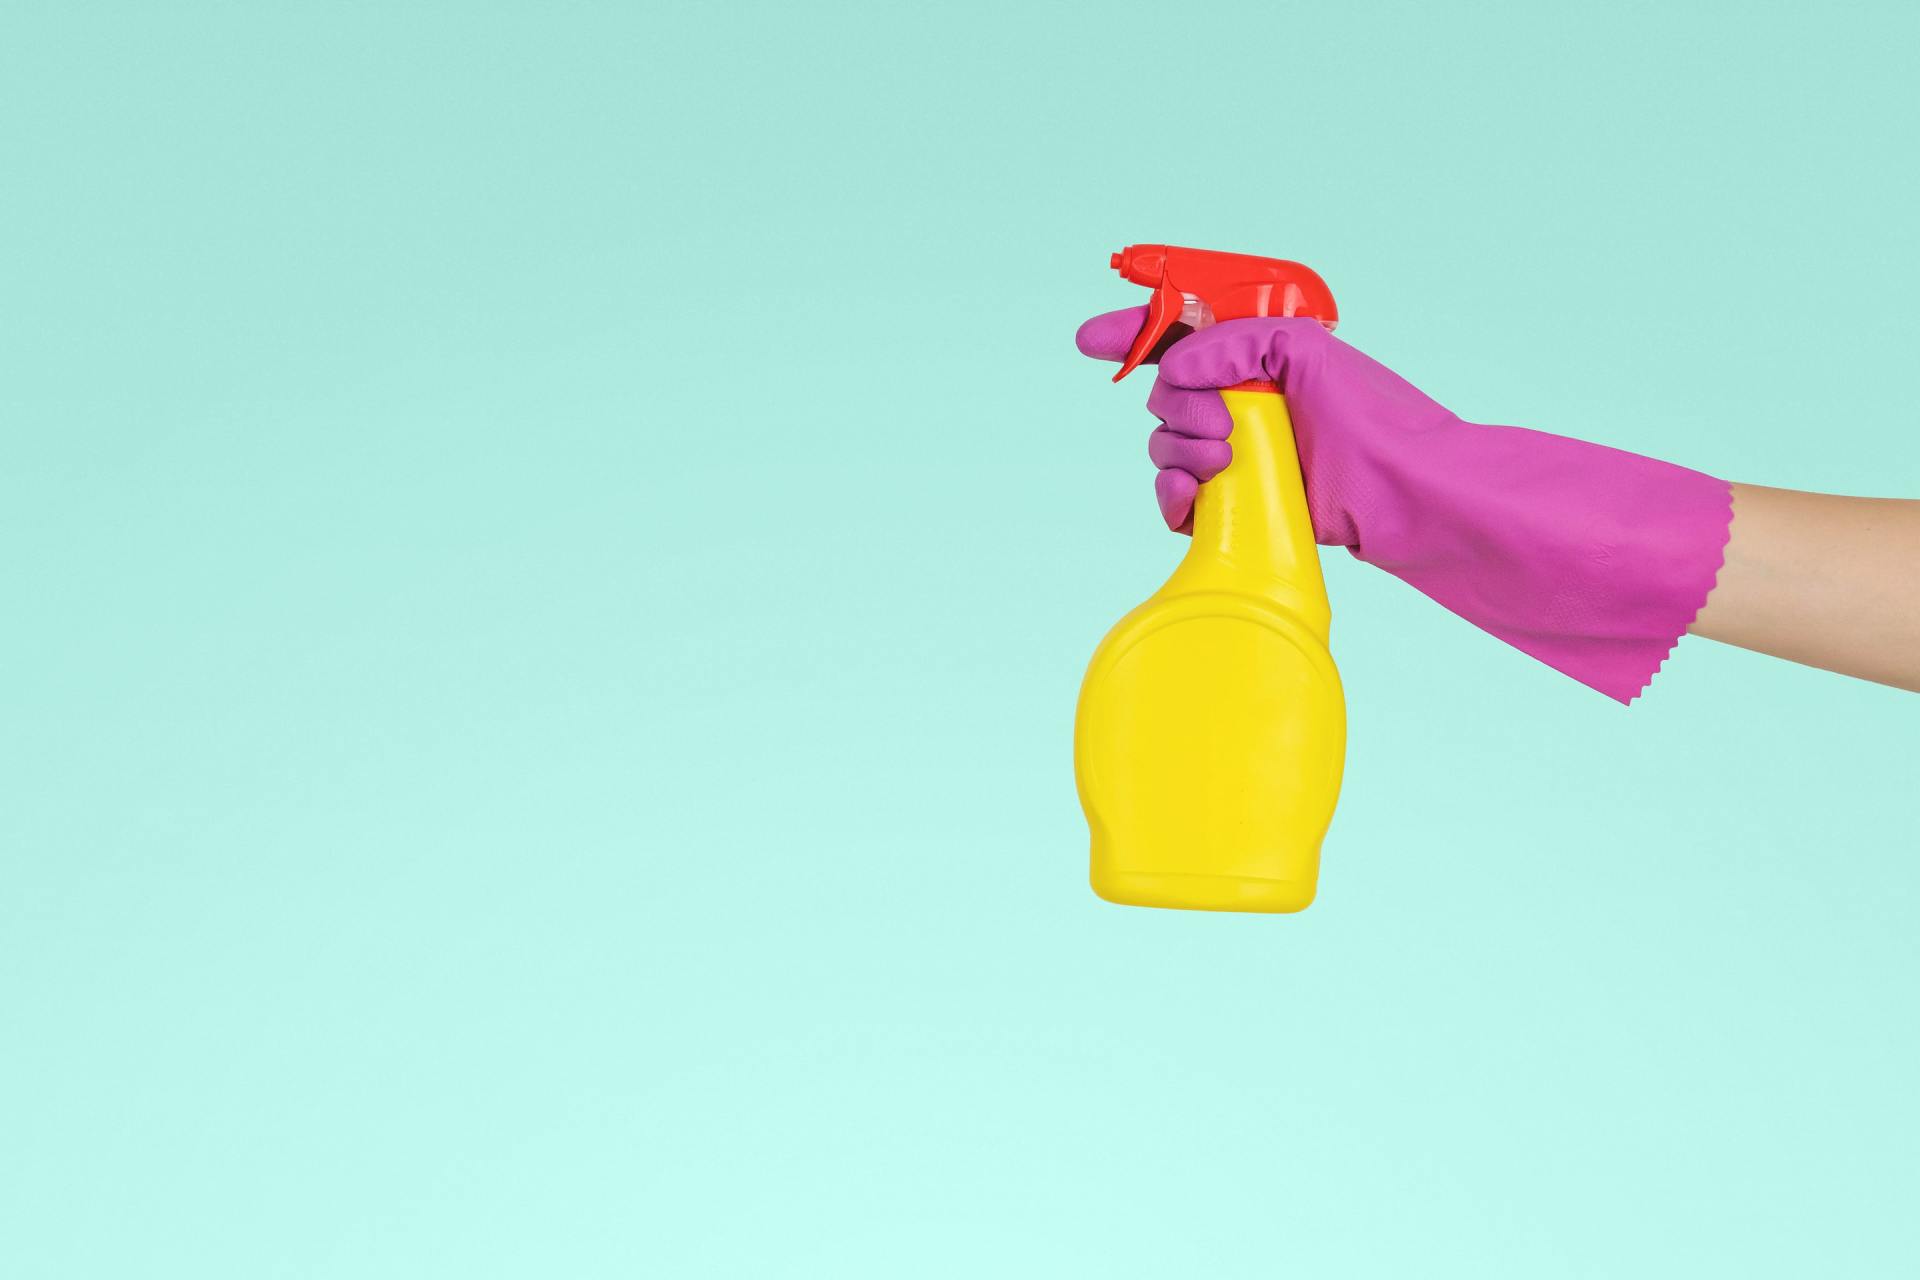 Cleaning products and asthma risk: a potentially important public health concern